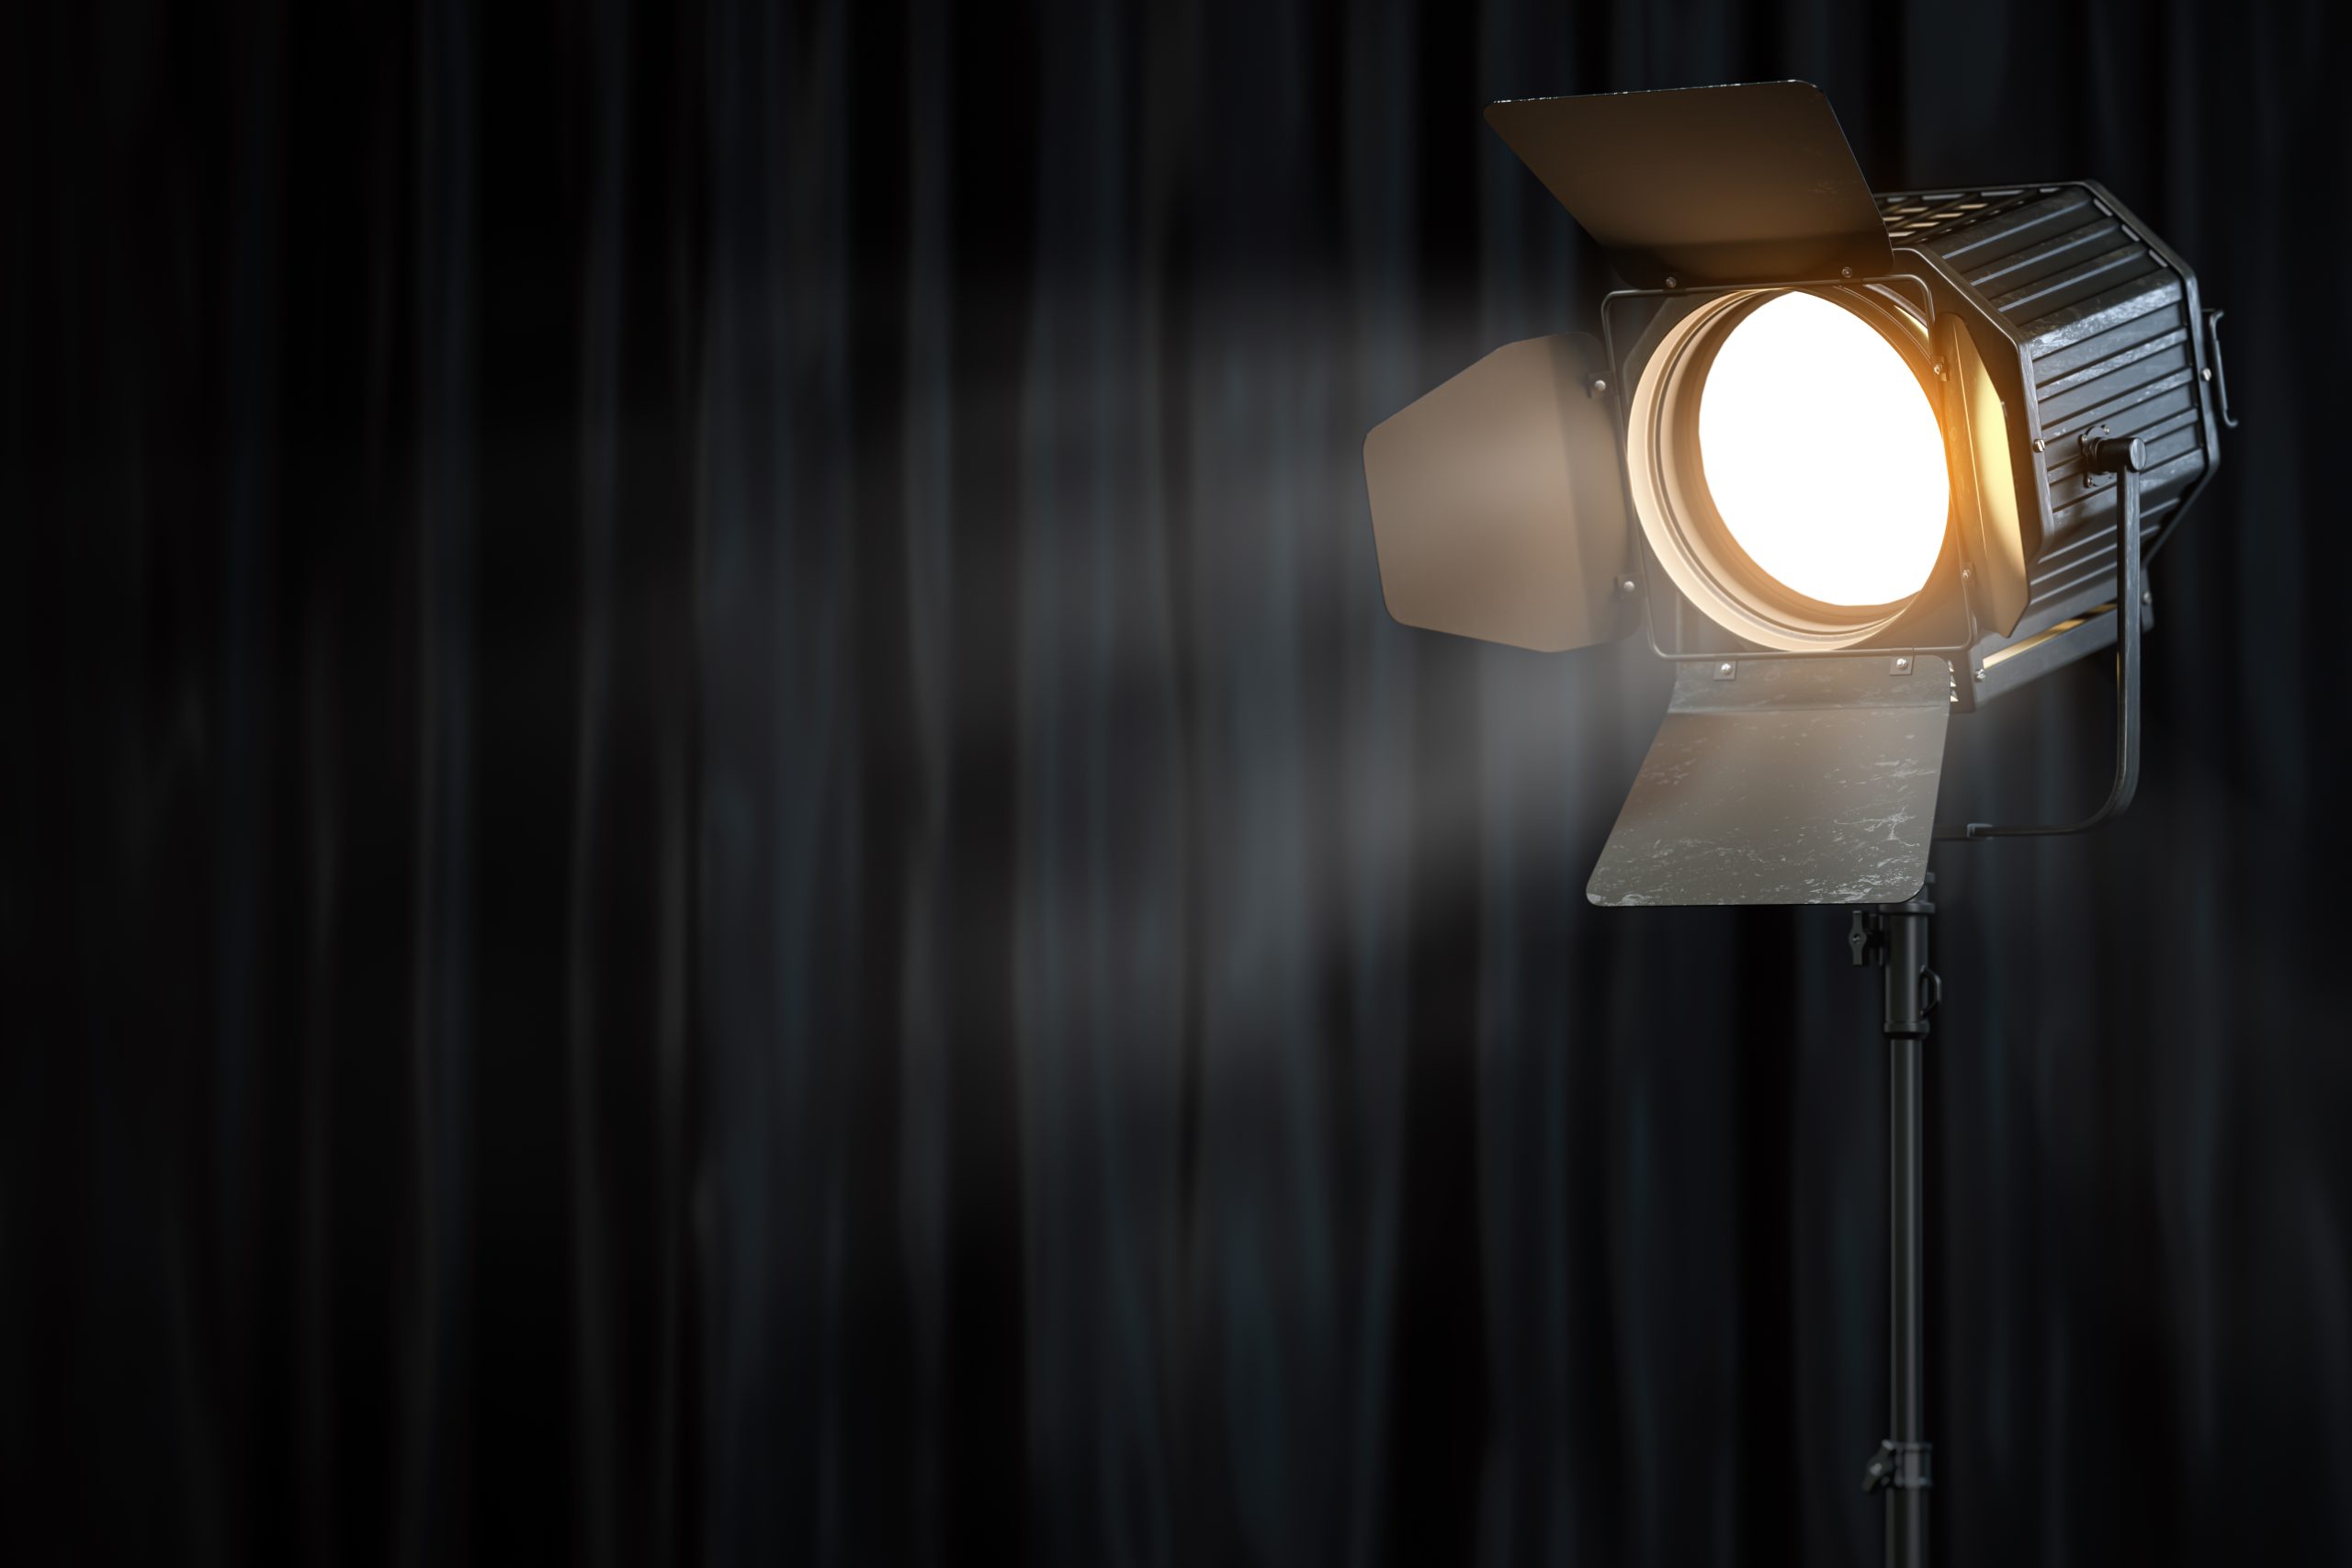 Stage or studio spotlight on black curtain background. Lighting equipment for Studio photography or videography. 3d illustration